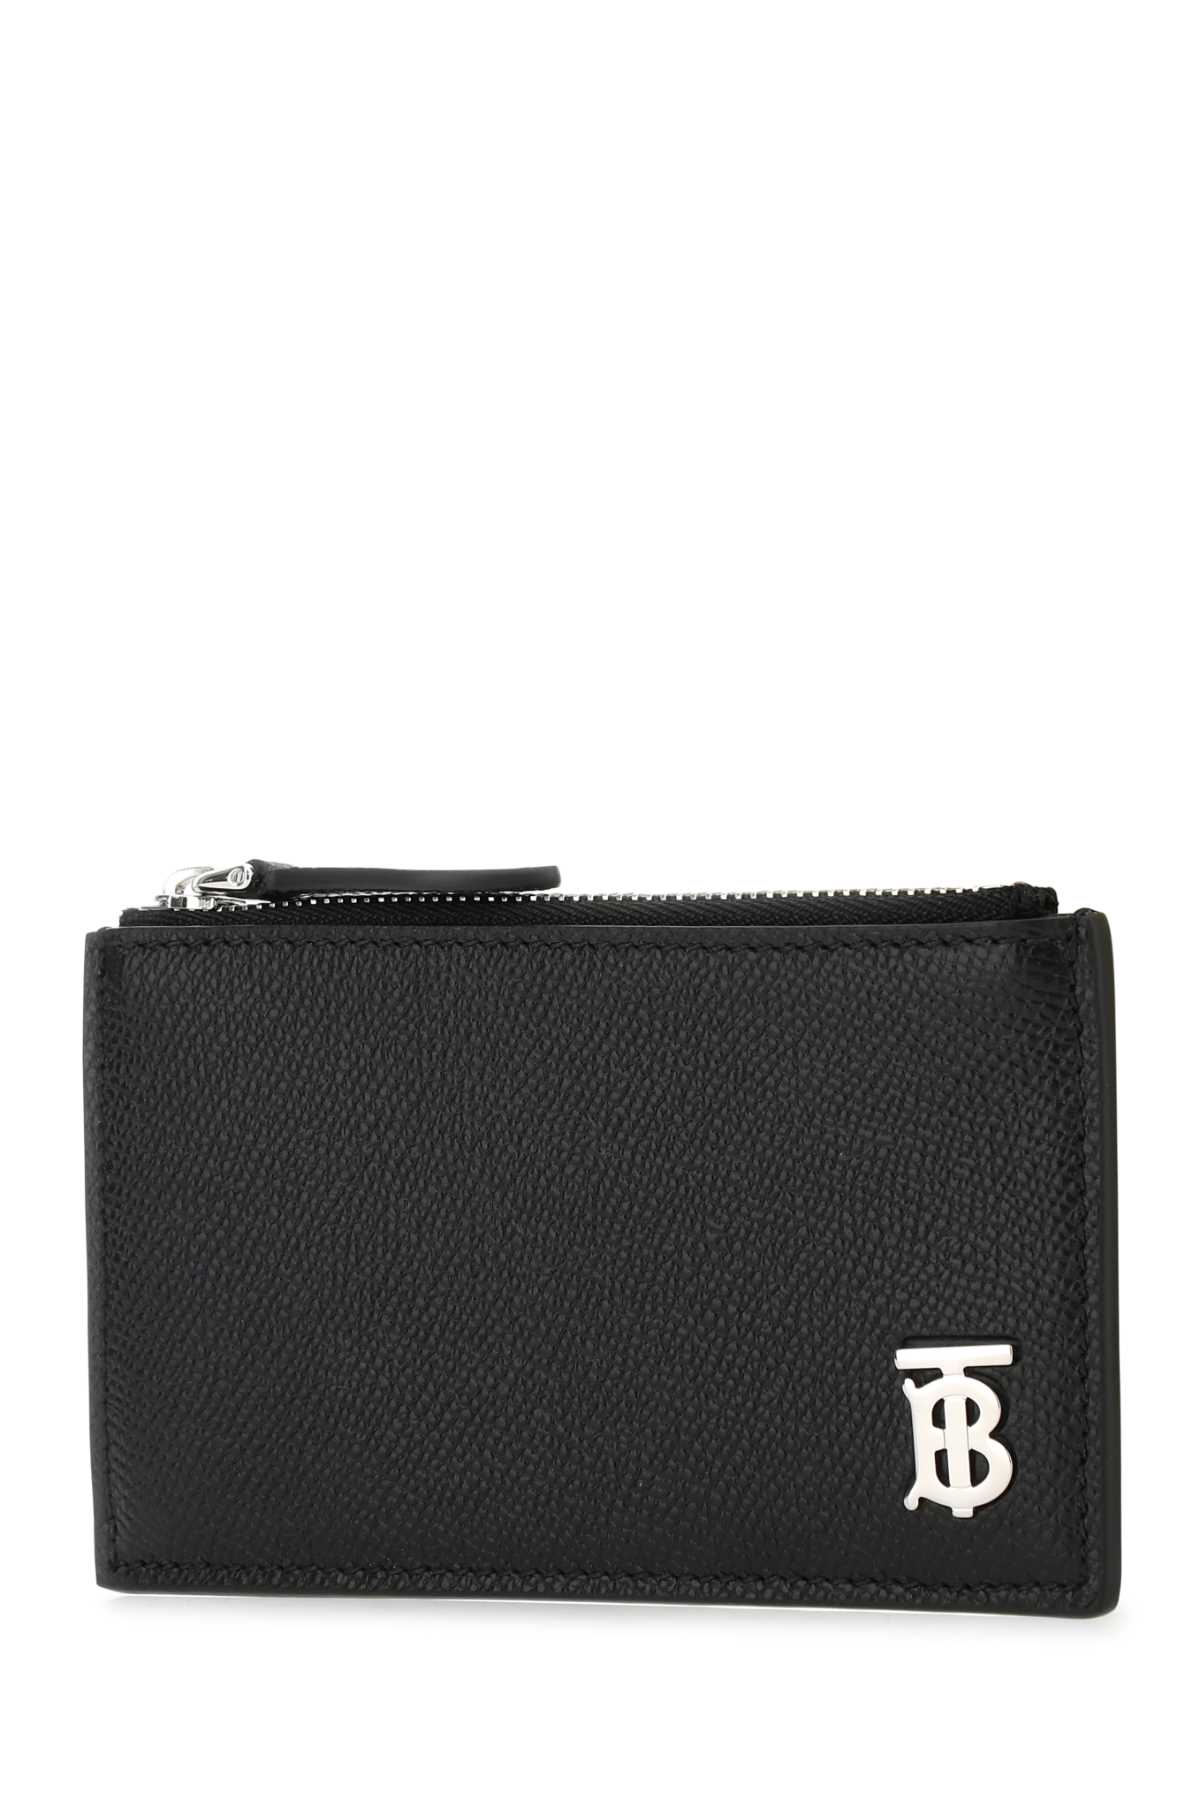 Shop Burberry Black Leather Card Holder In A1189